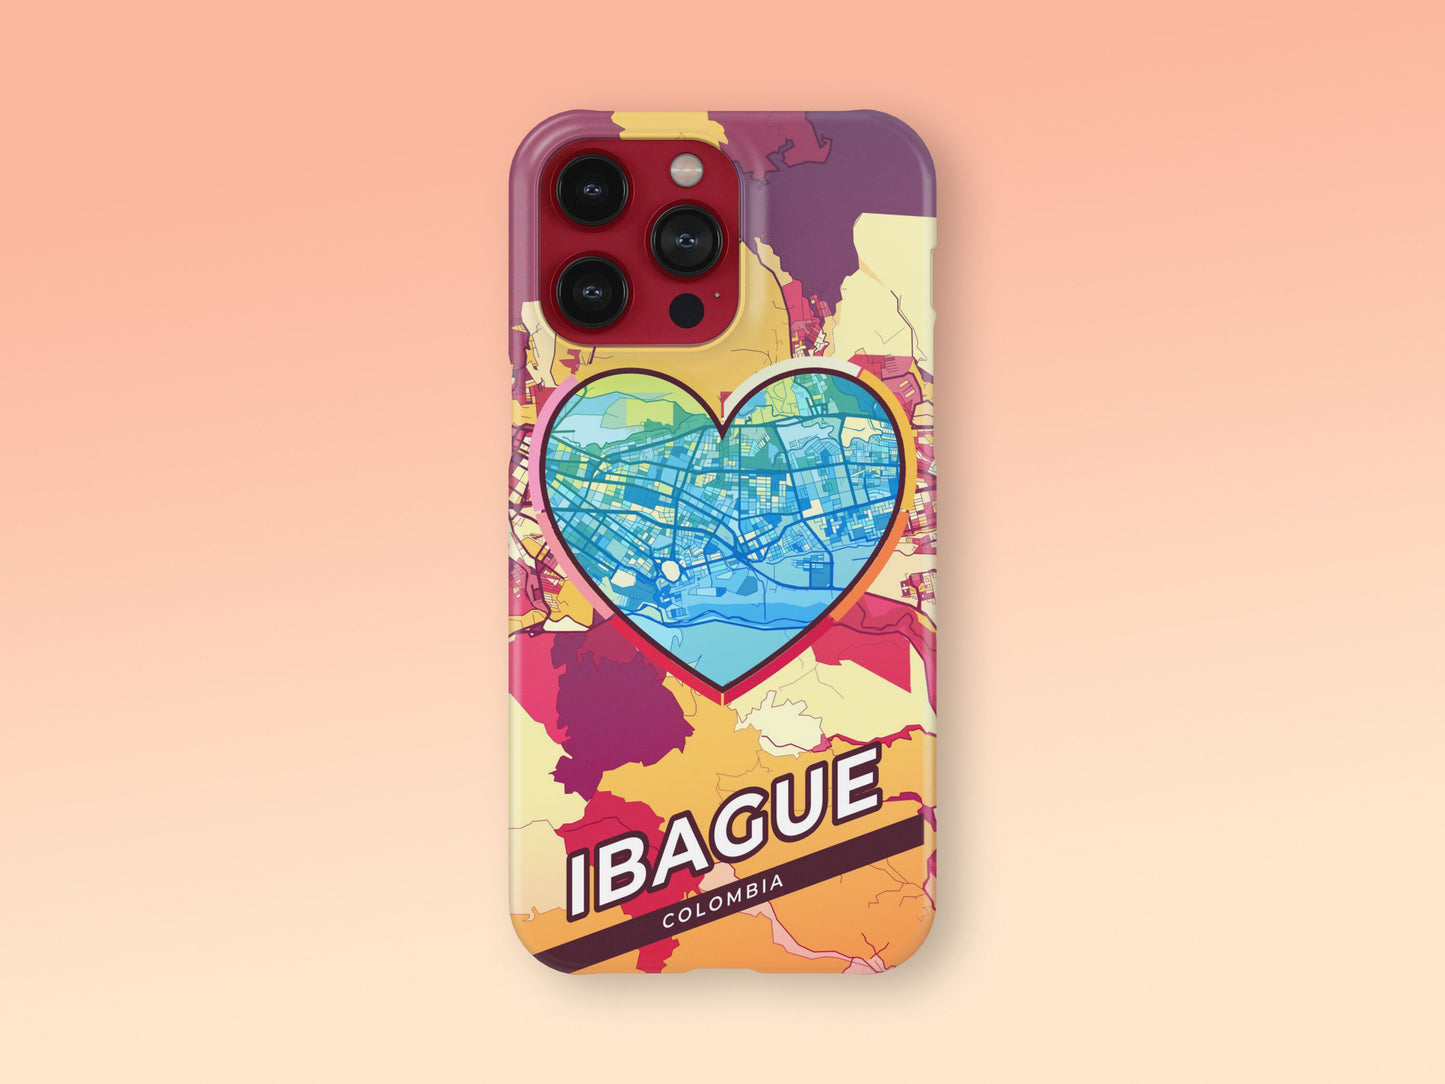 Ibague Colombia slim phone case with colorful icon. Birthday, wedding or housewarming gift. Couple match cases. 2